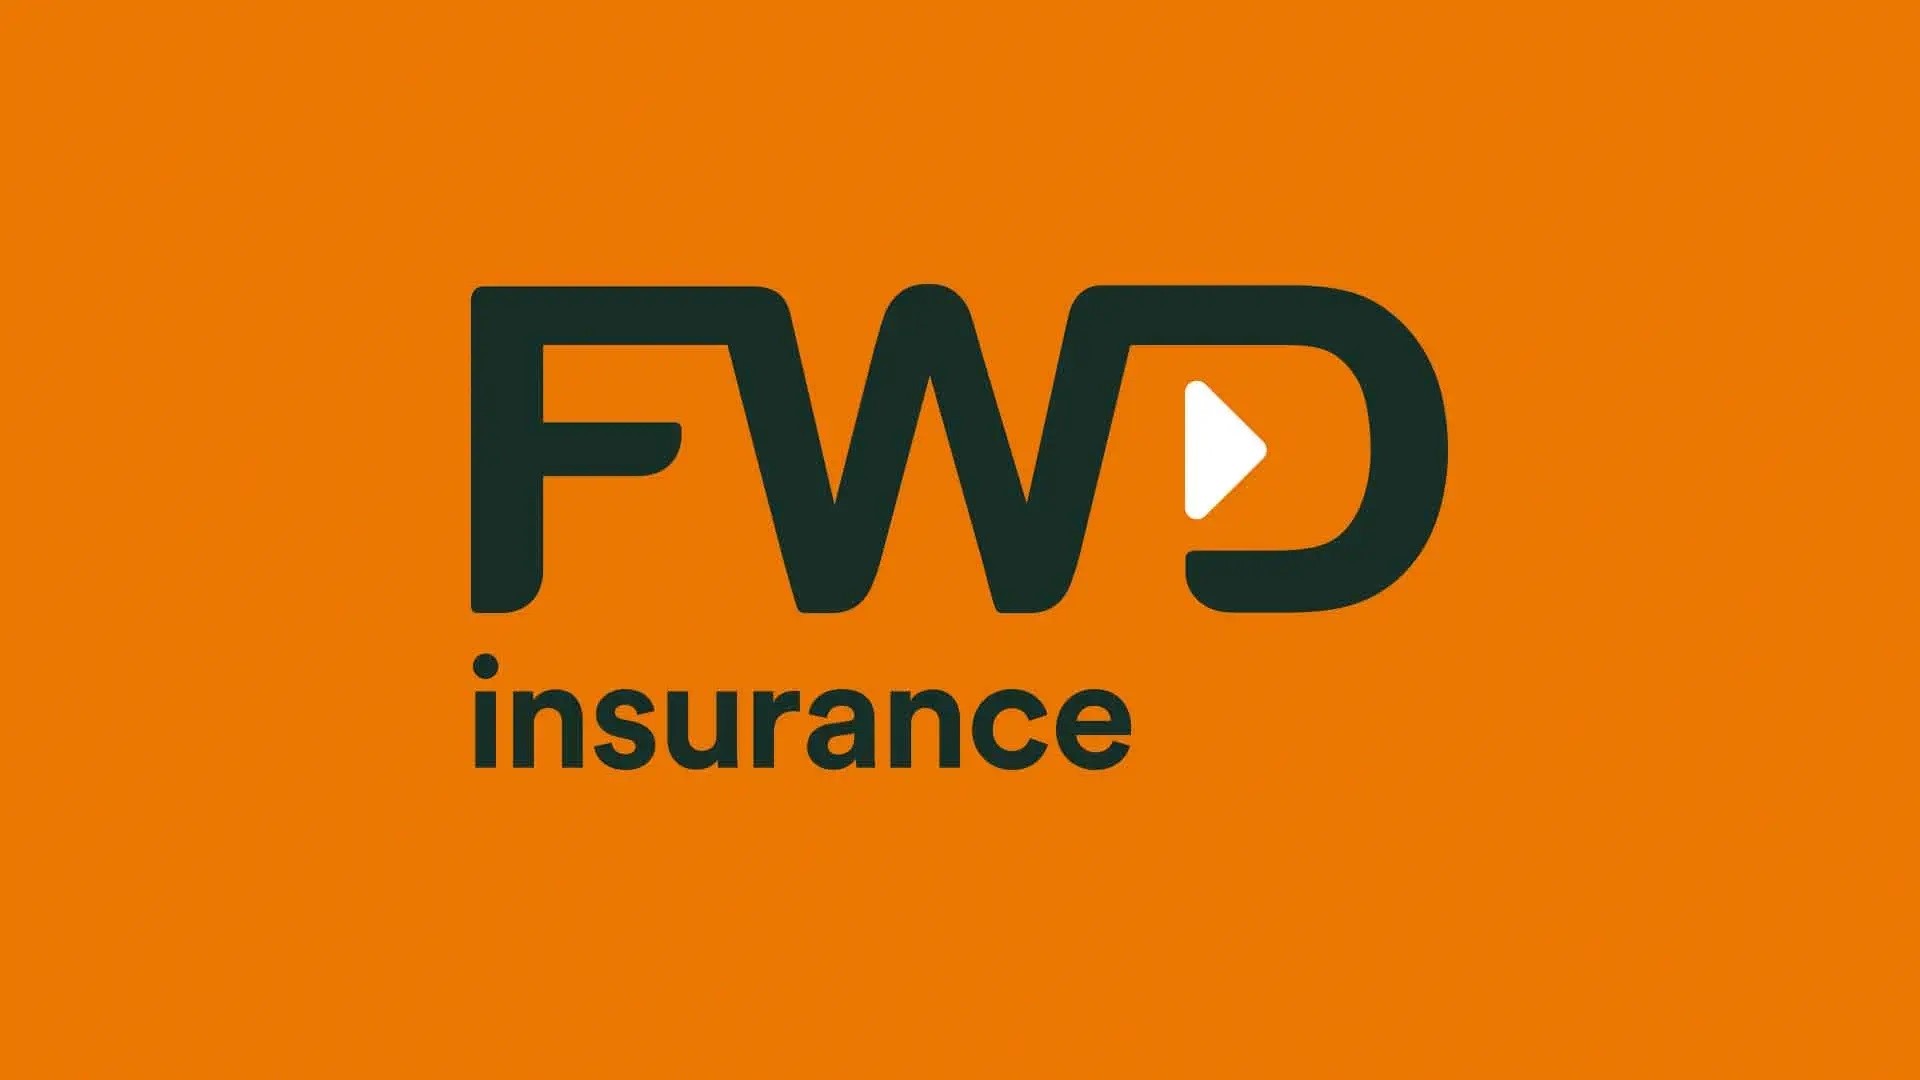 https://coinpay.in.th/insurance-fwd/